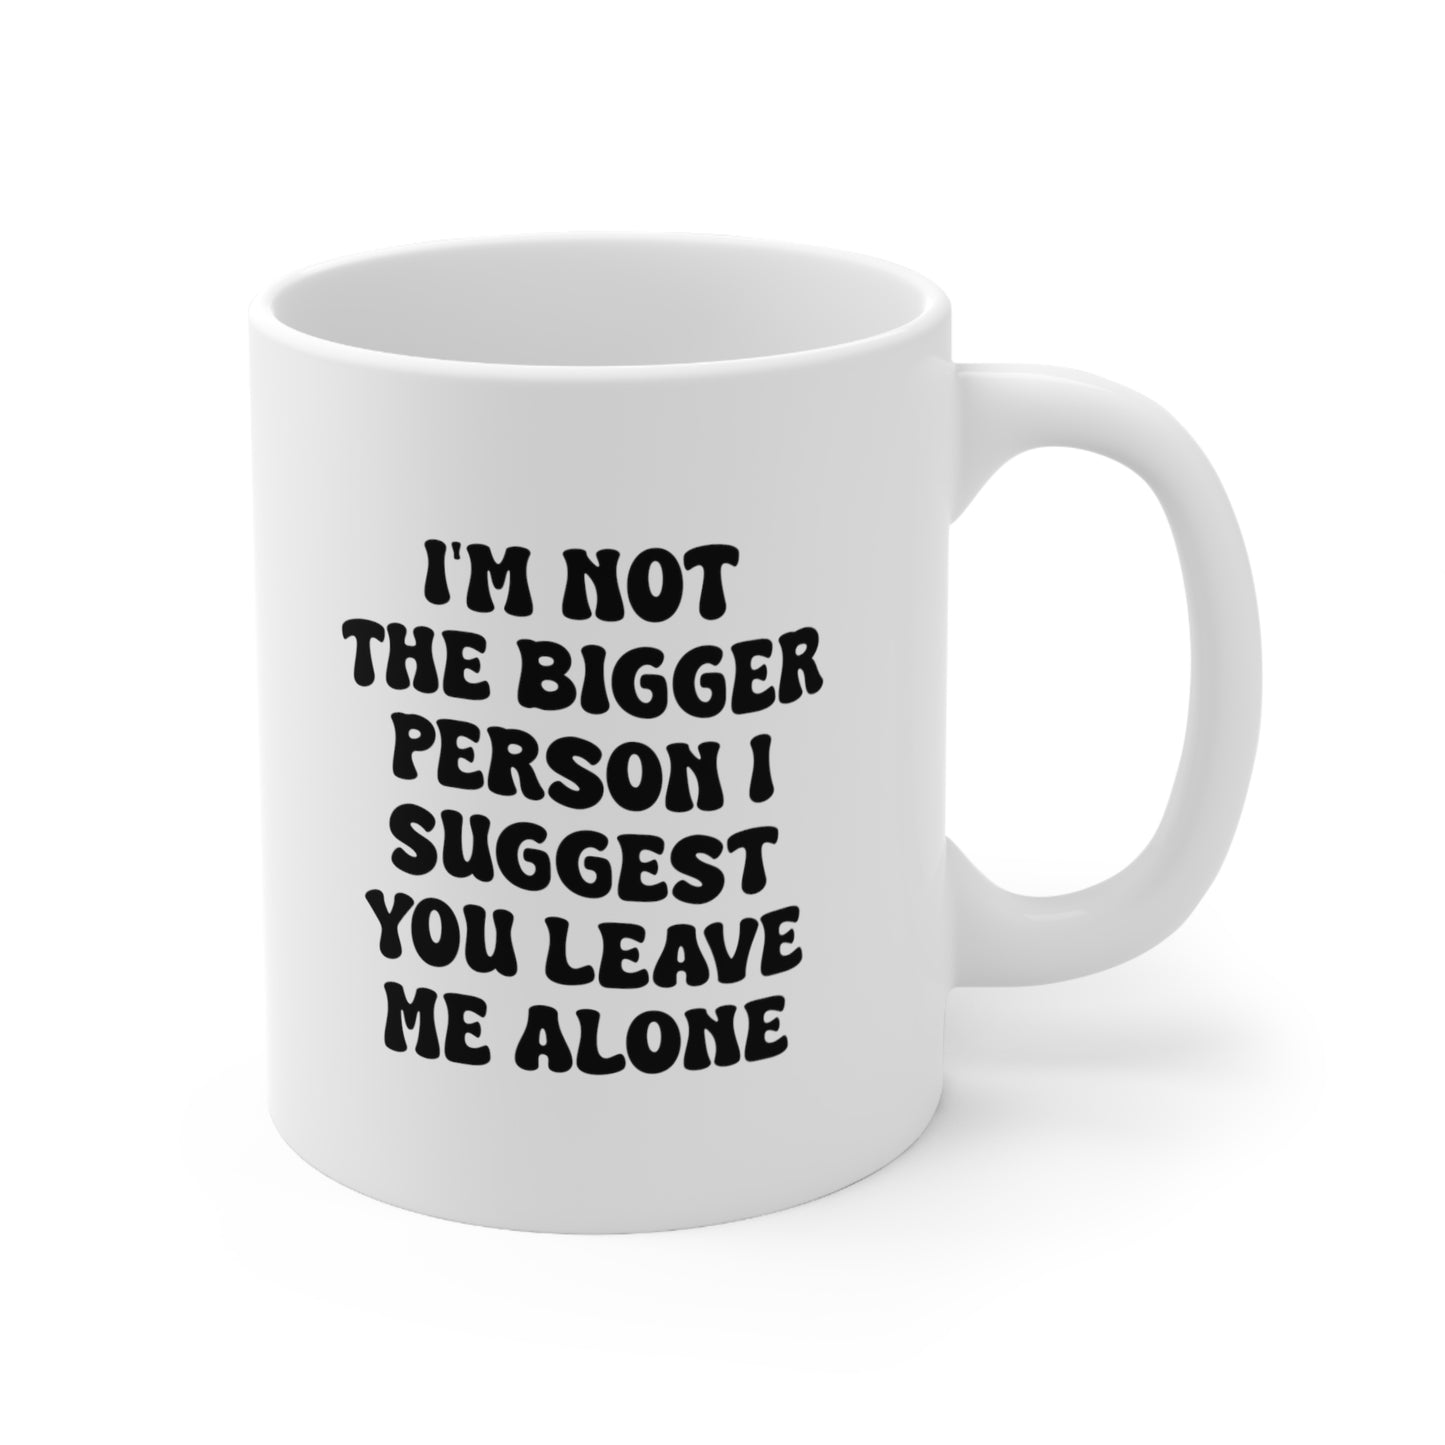 I'm Not The Bigger Person I Suggest You Leave Me Alone Coffee Mug 11oz